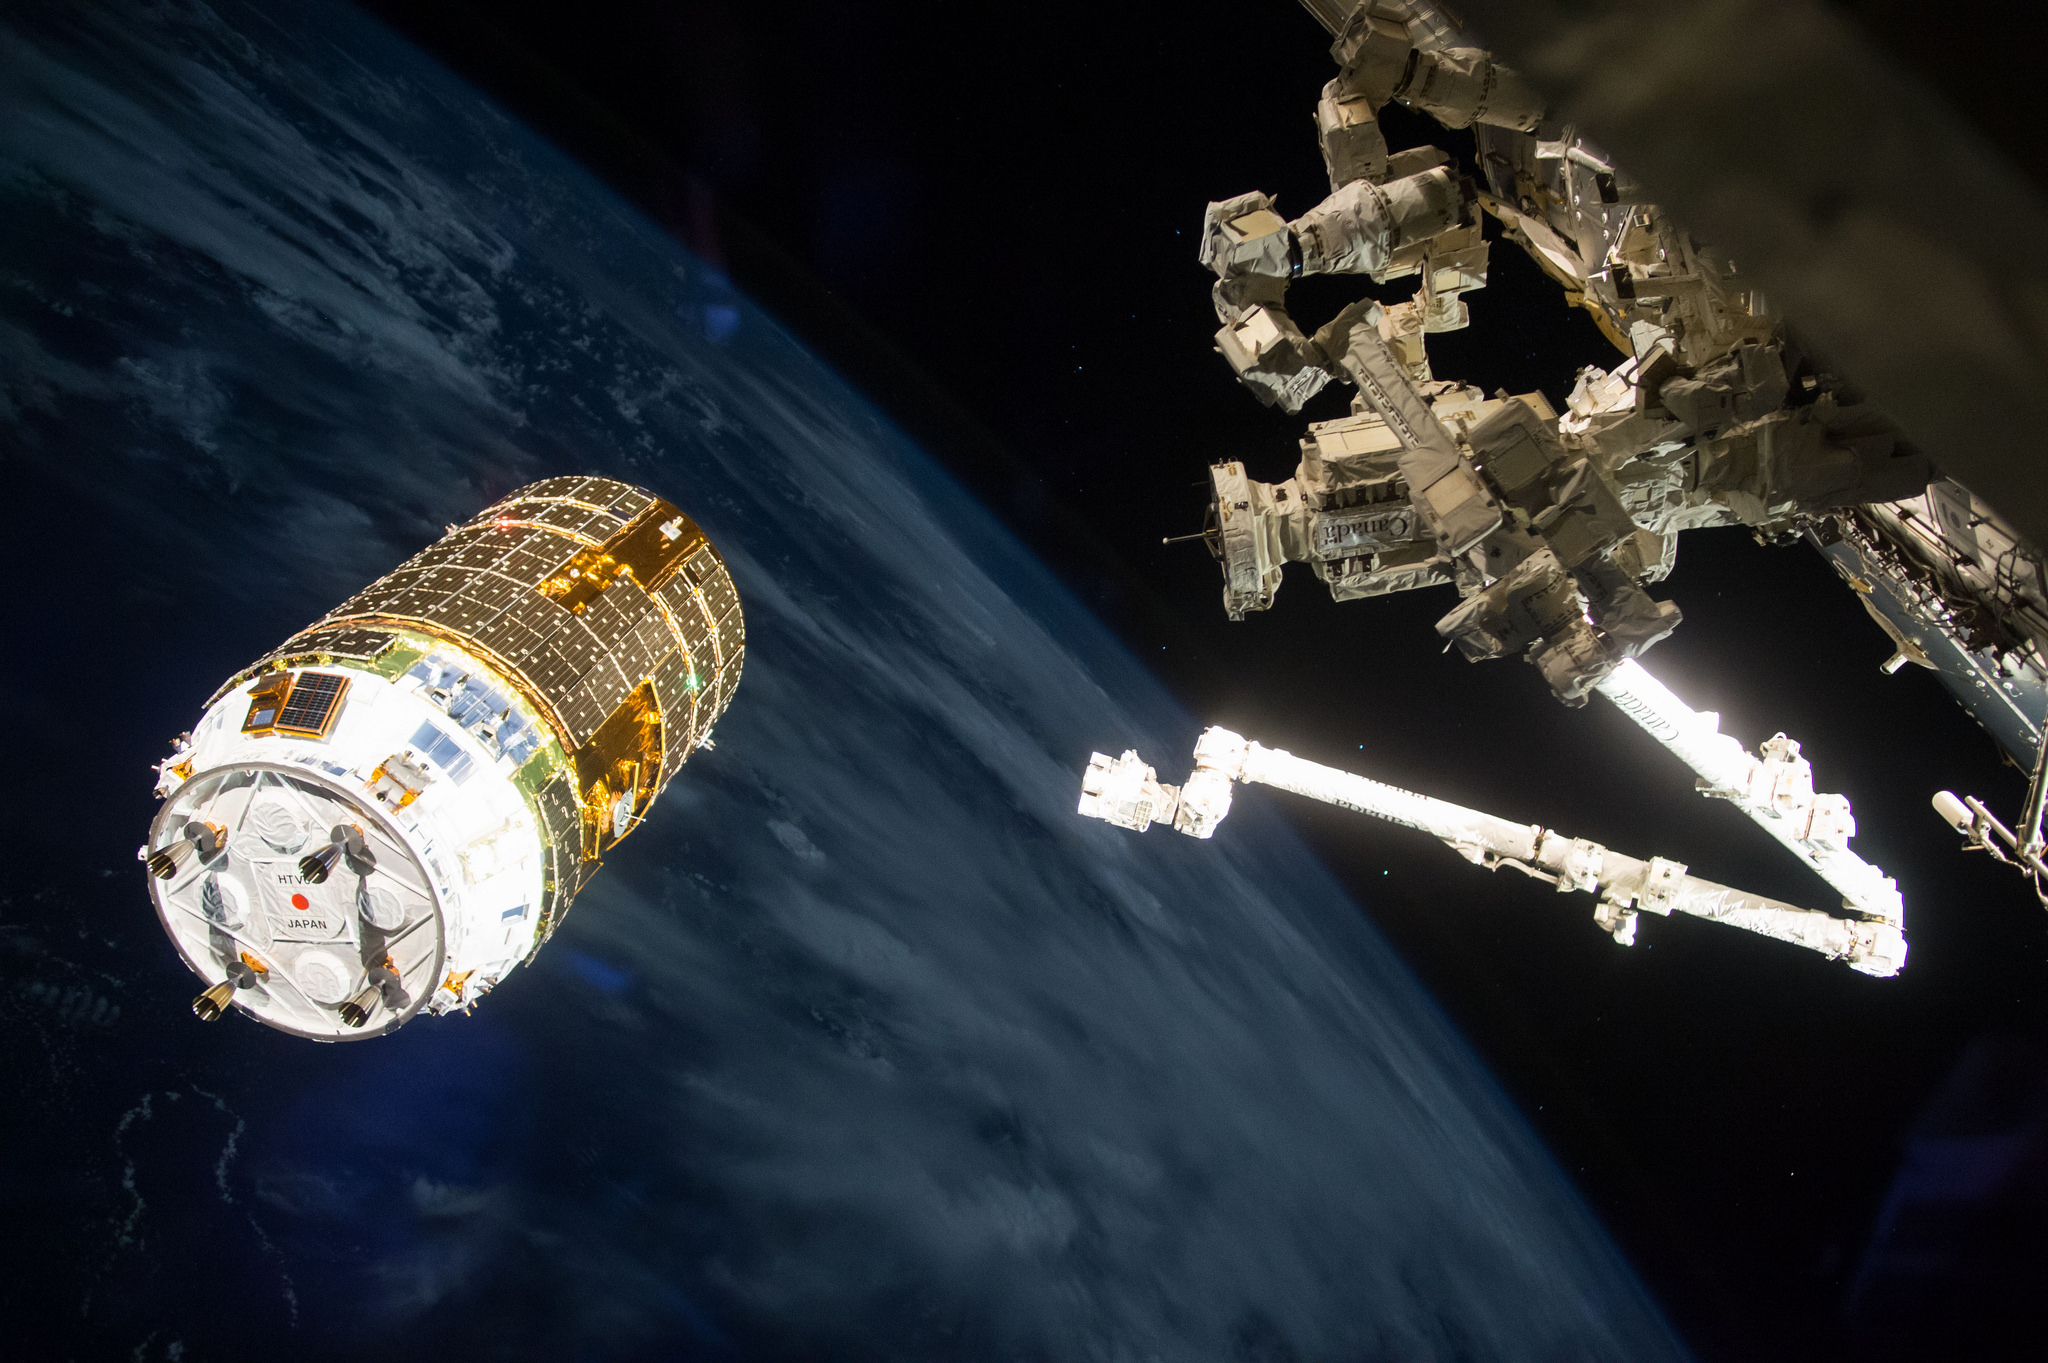 The Japanese HTV-6 cargo vehicle is seen during final approach to the International Space Station 